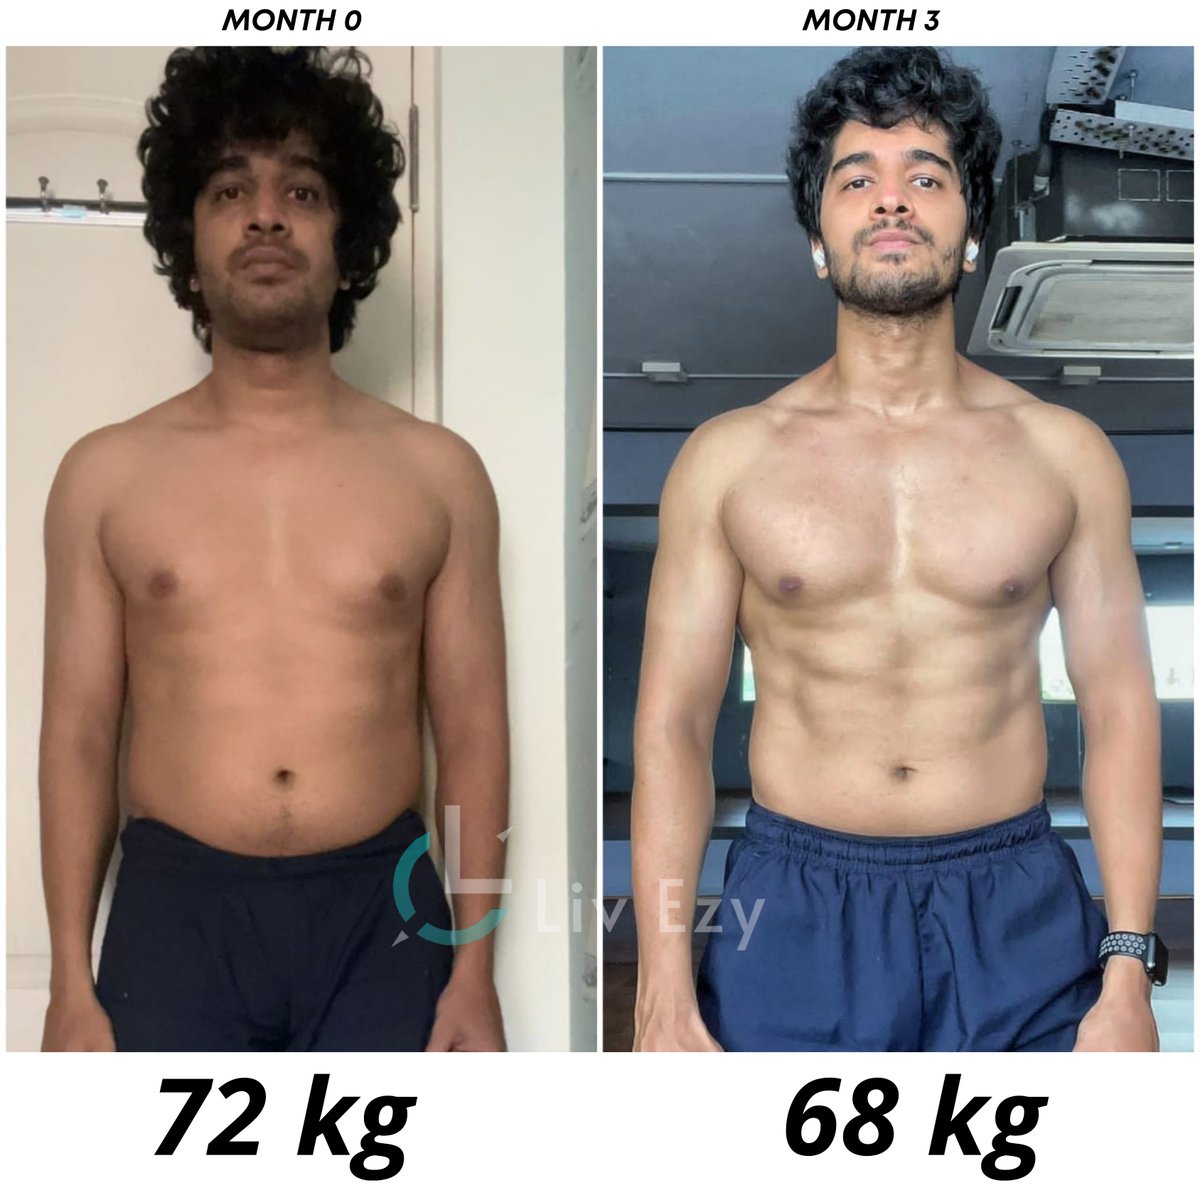 Client Body Recomp Transformation💪🏼🔥

Syed Sareem has lost 3 kgs (72kgs- 68kgs) but most importantly has gone through an impeccable body recomposition in just 3 months! Well done Sareem!👏🏼

#bodyrecomposition #transformation #weightloss #livezy